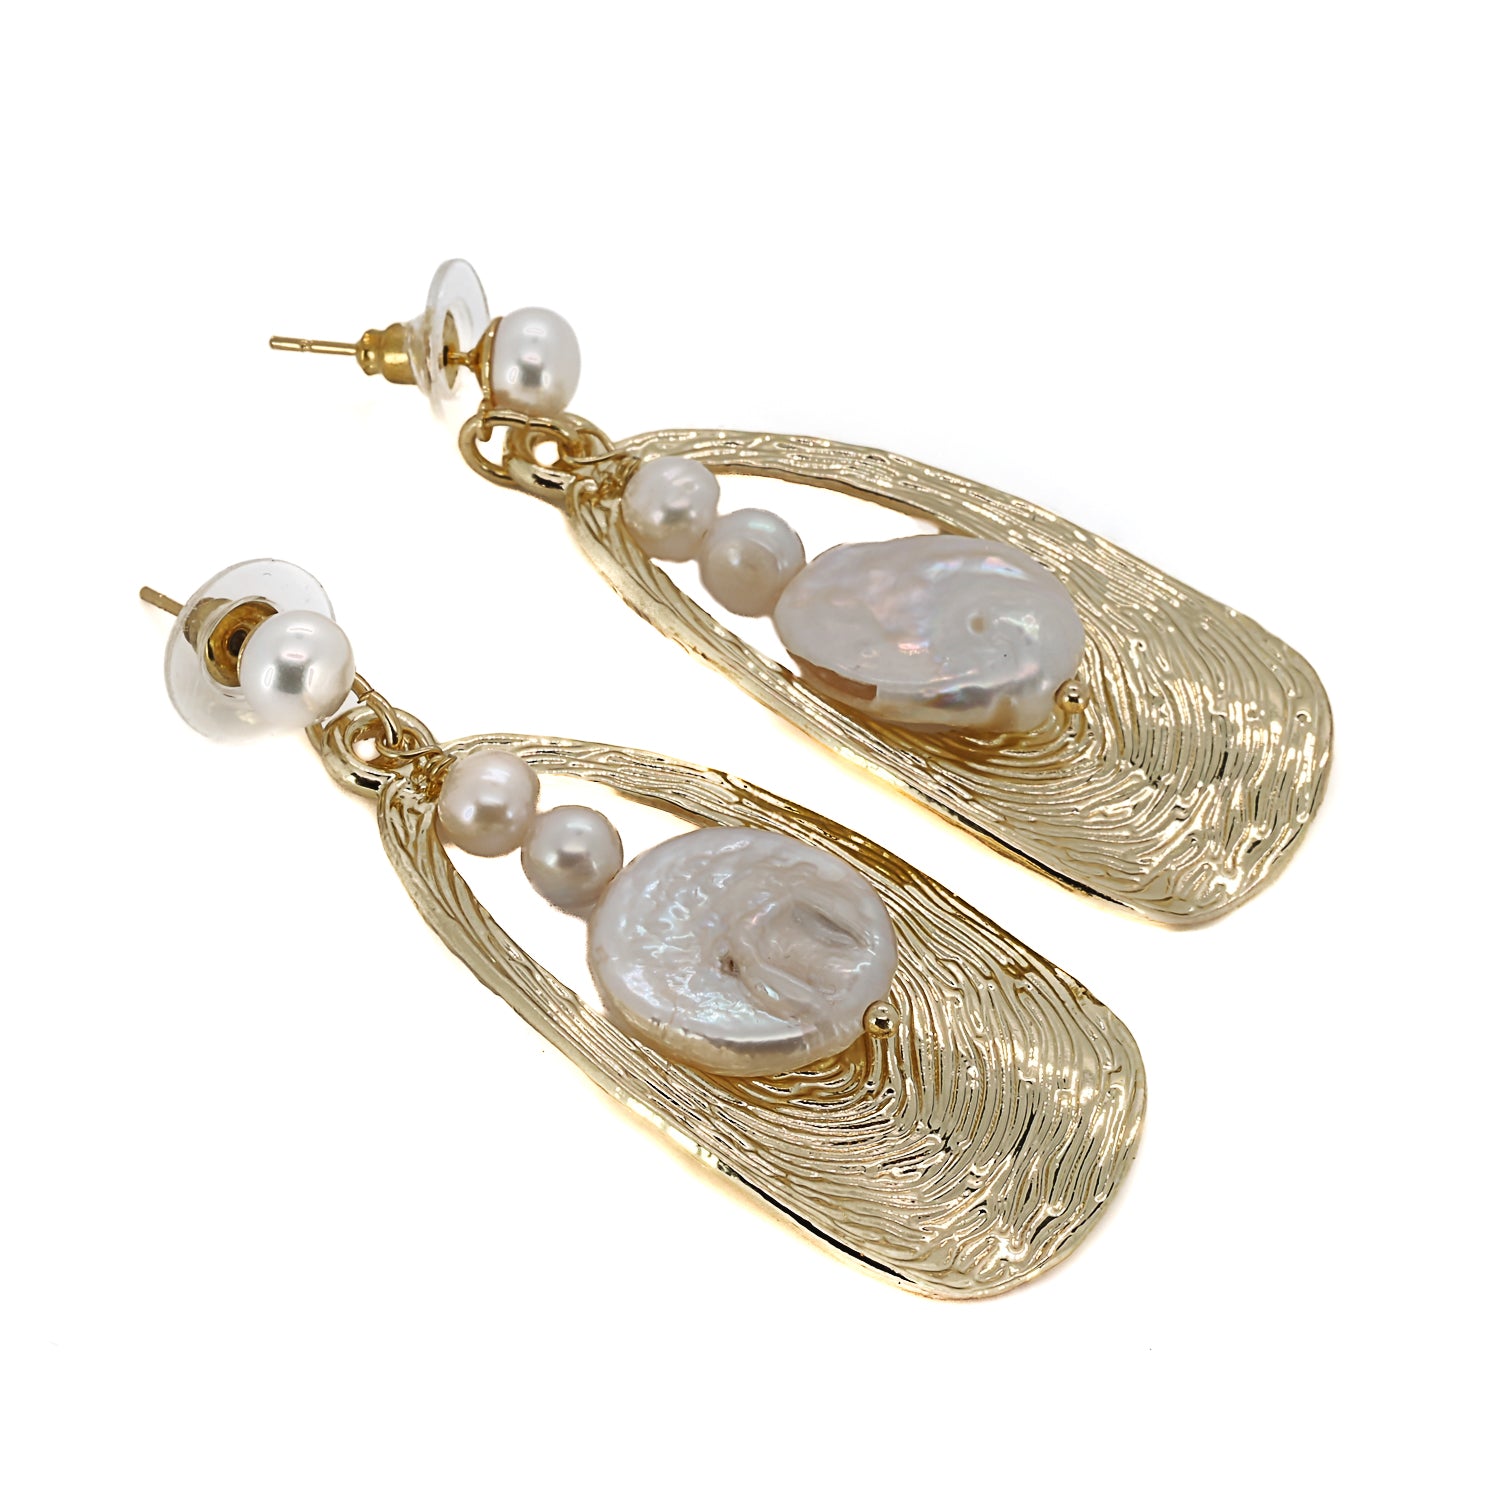 Radiant Elegance: Gold & Pearl Dangle Earrings, Handcrafted Glam.